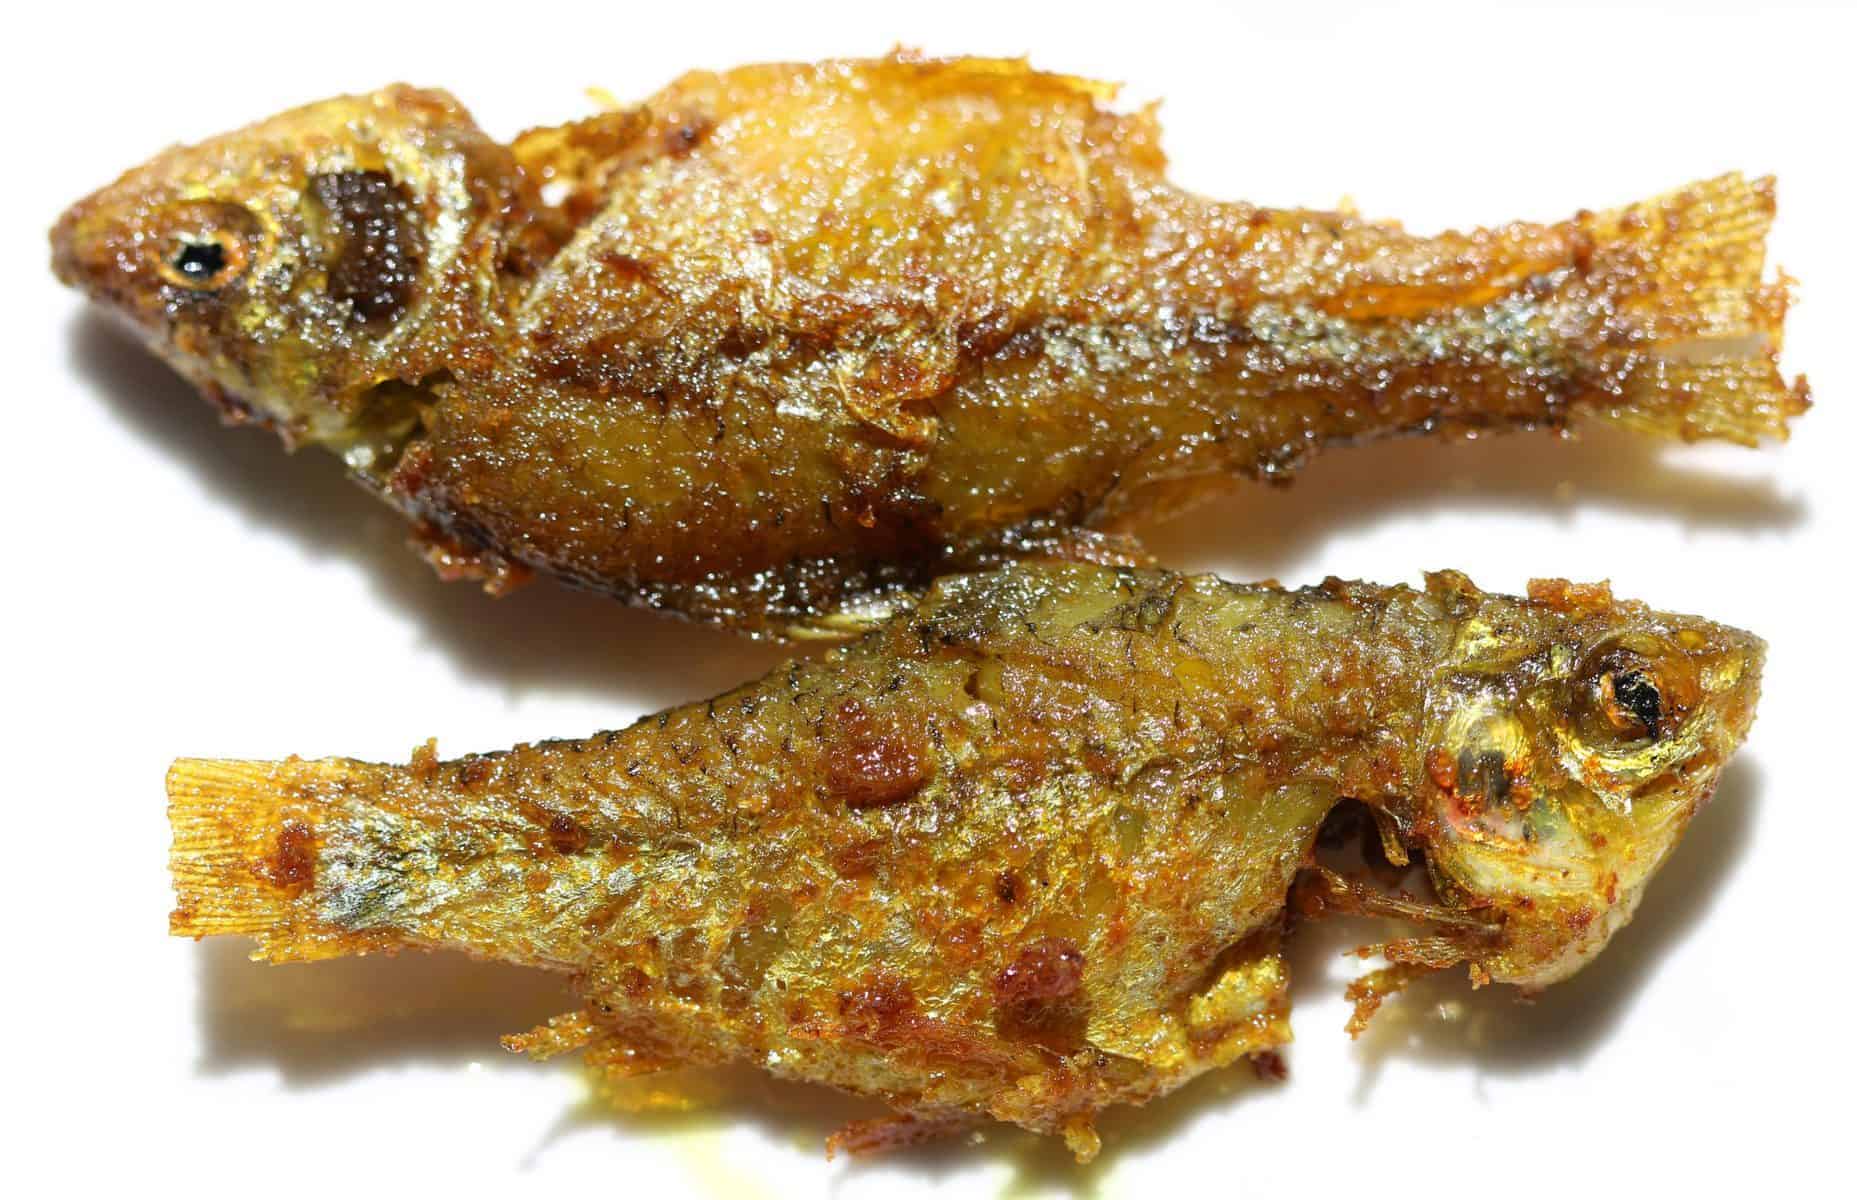  Best Oil to Fry Fish: How to Choose